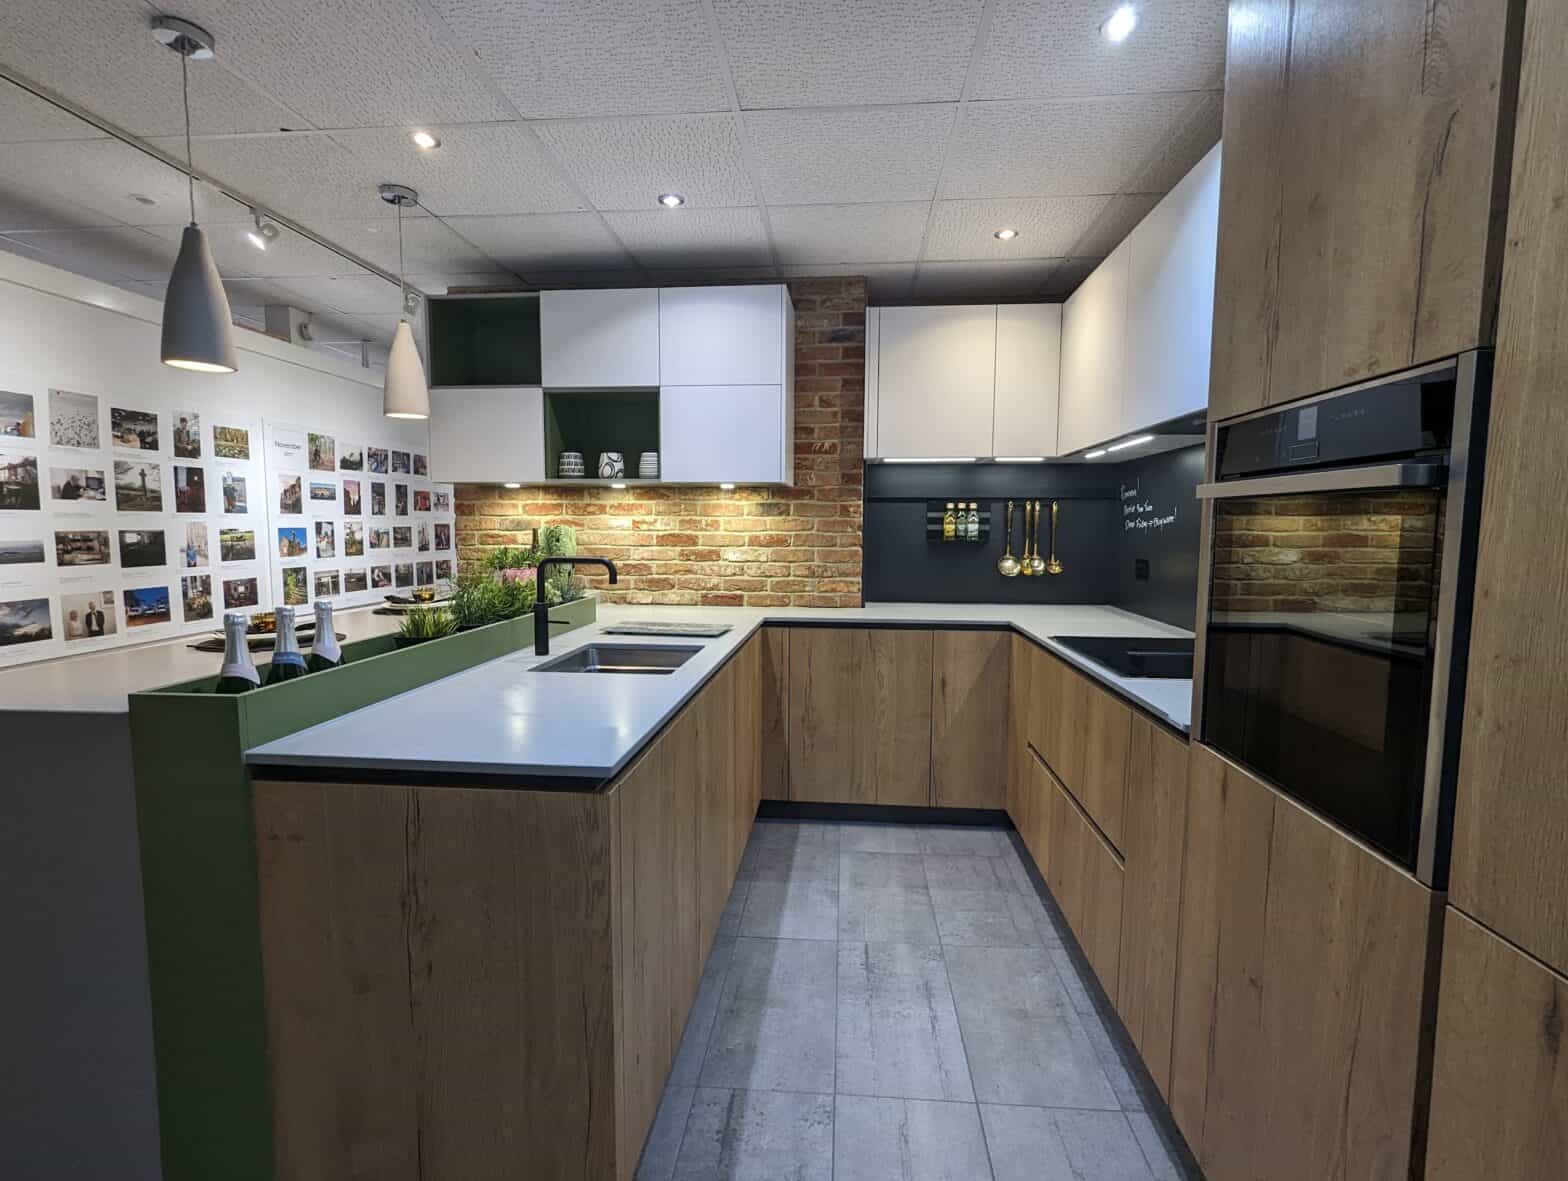 A photo of a U shaped kitchen with wood effect doors and concrete worktop. There is an oven in a tall housing. The splash backs are a writable chalk board like panel.